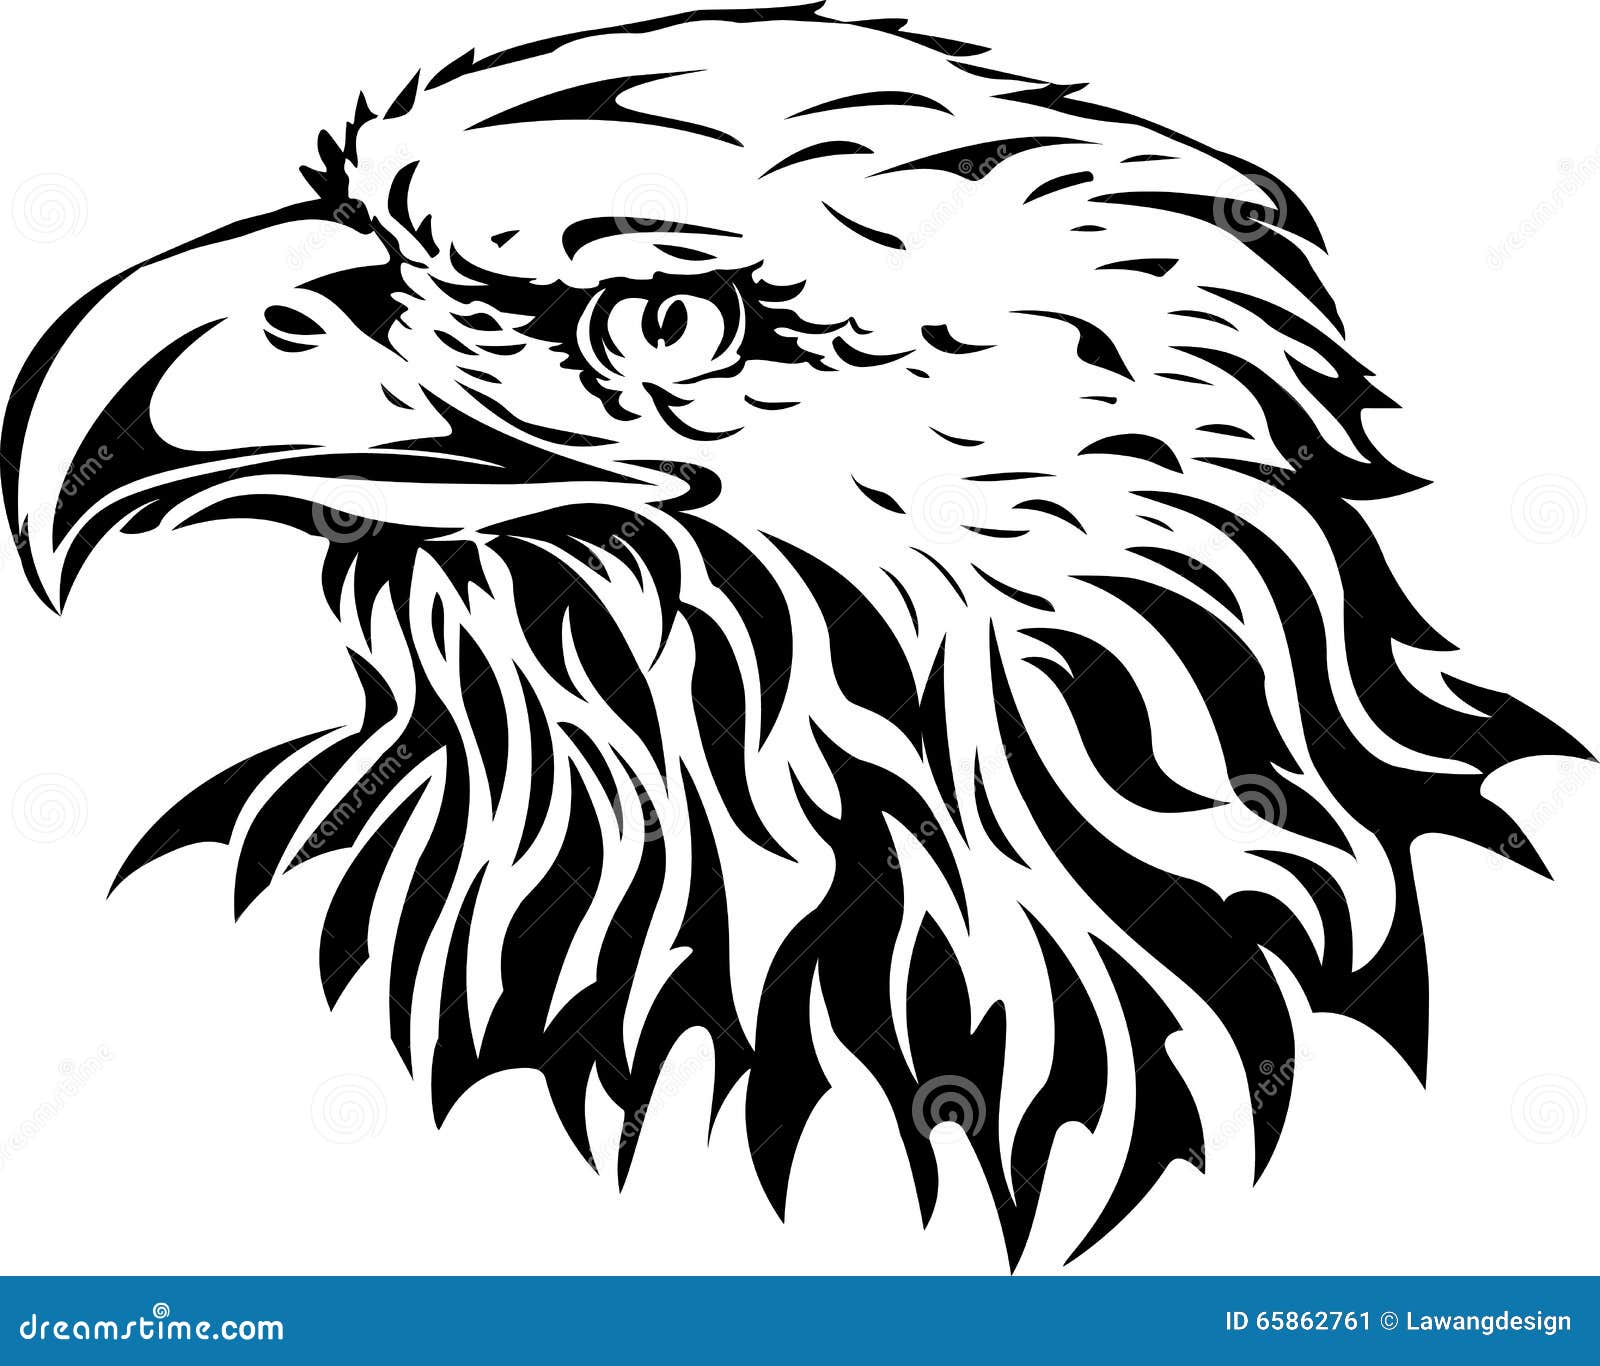 Silhouette of eagle head stock vector. Illustration of american - 65862761